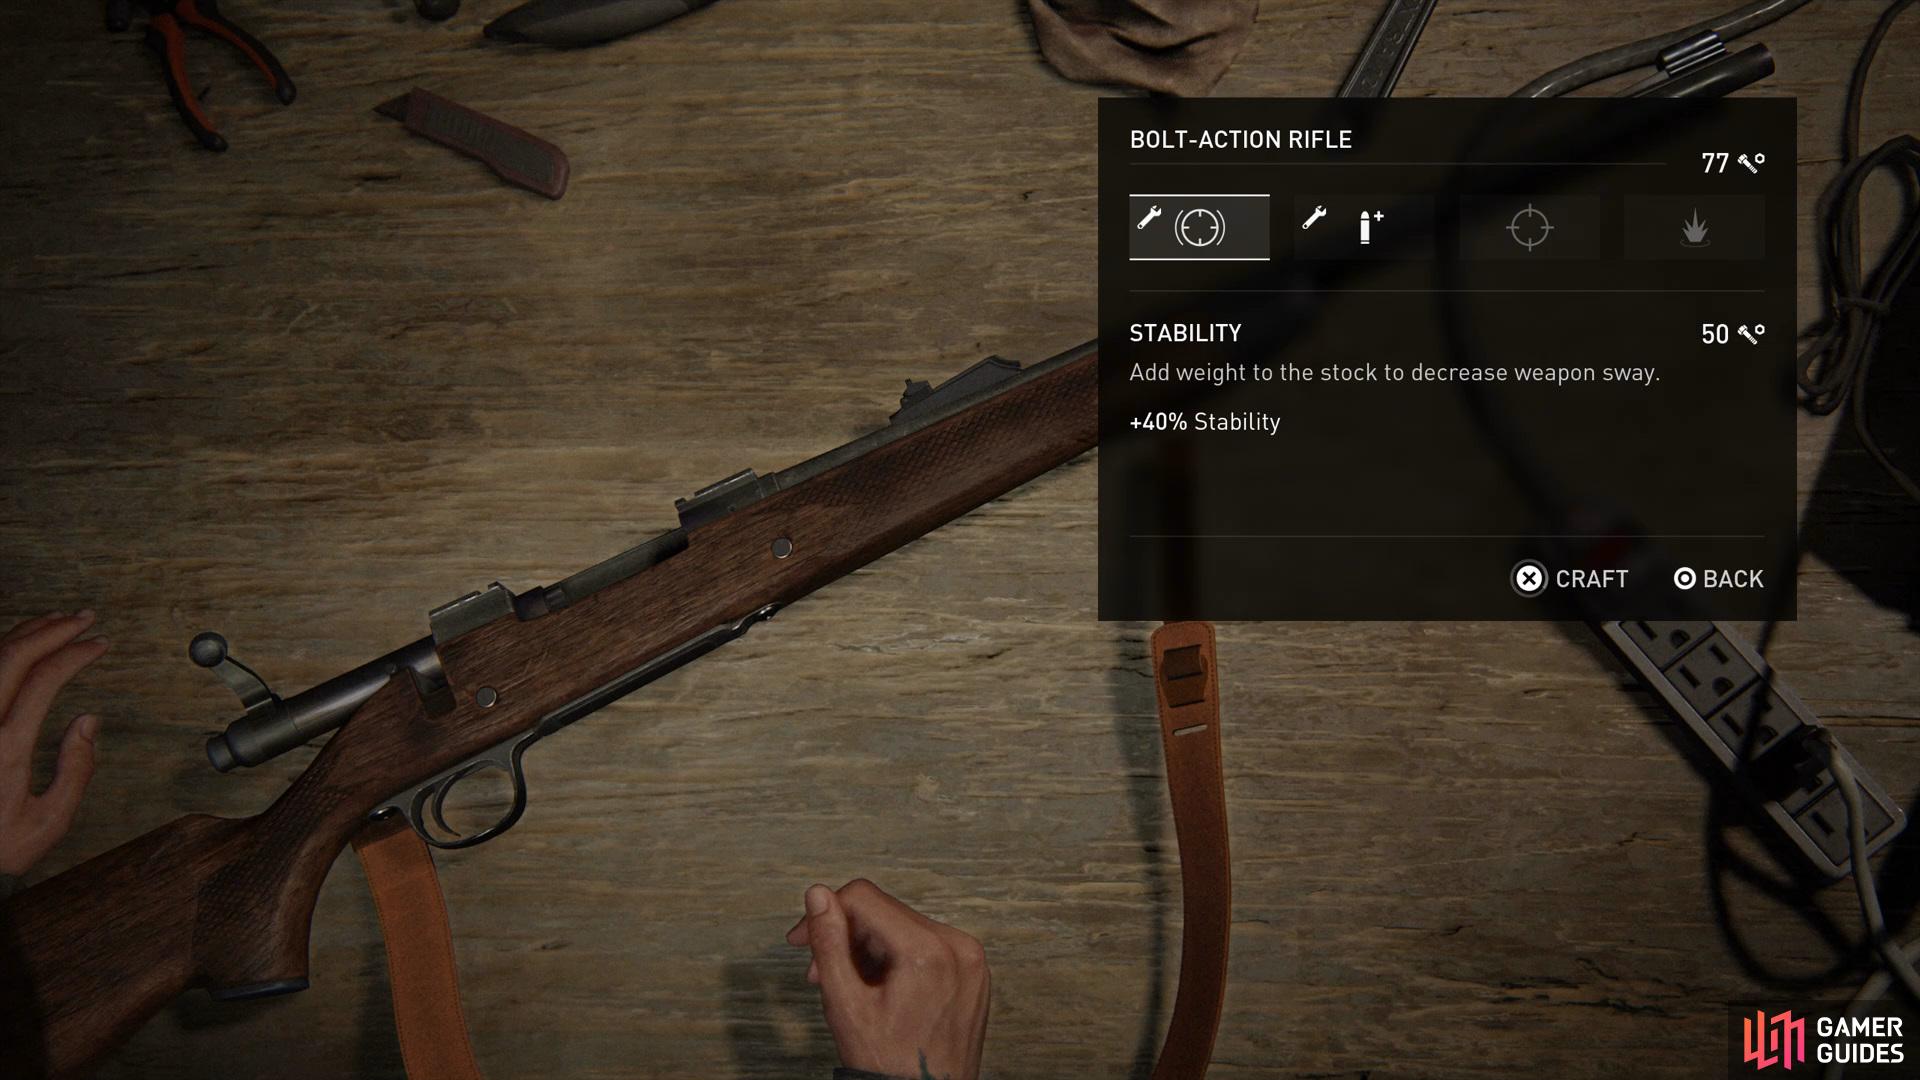 Finally, turn on the generator and then interact with the workbench to upgrade your rifle. 